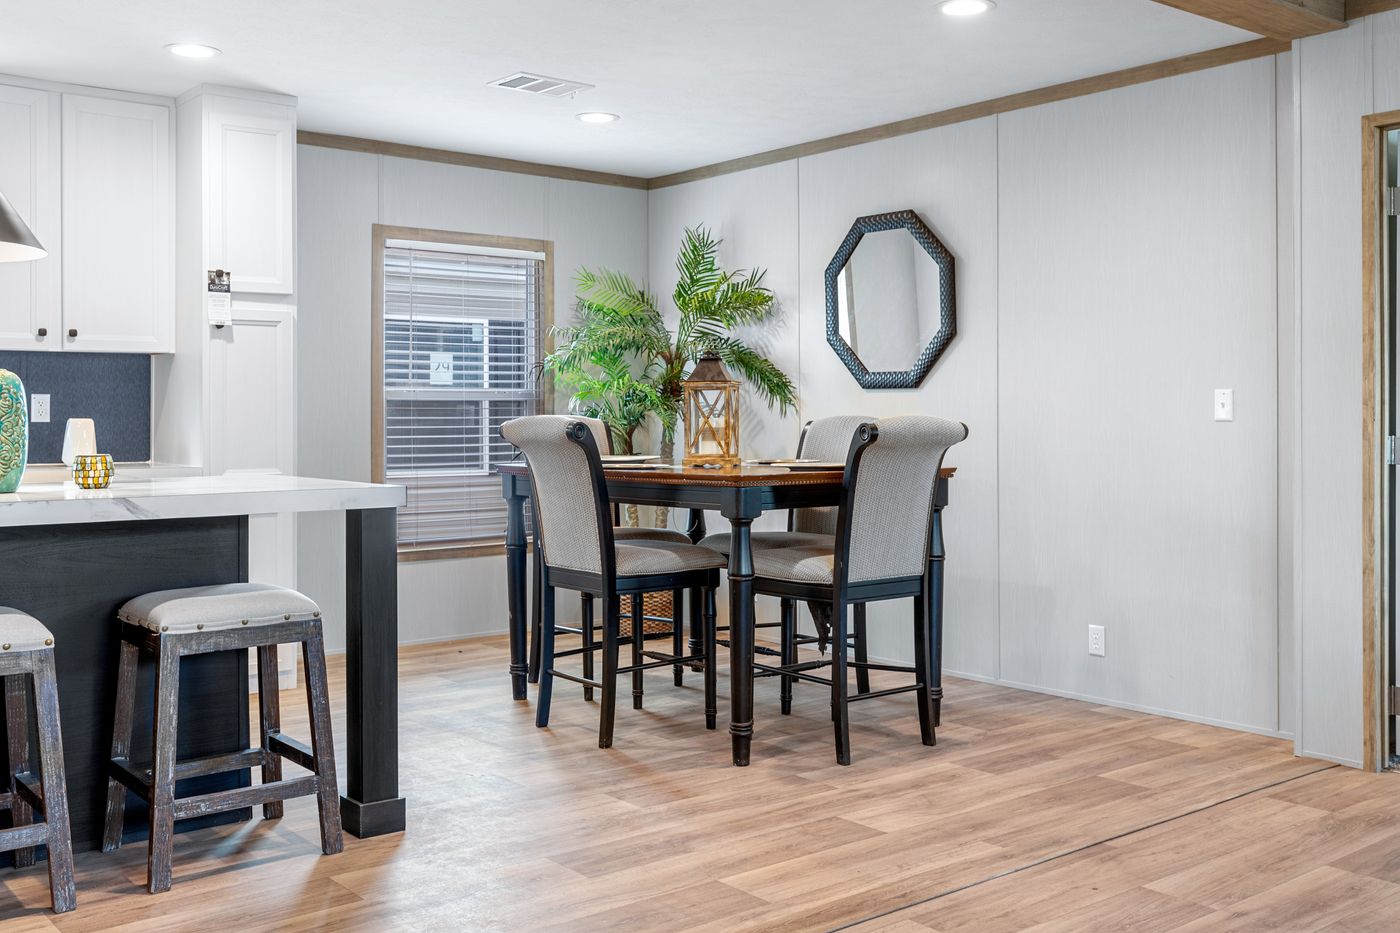 The ANATOLIA Dining Area. This Manufactured Mobile Home features 3 bedrooms and 2 baths.